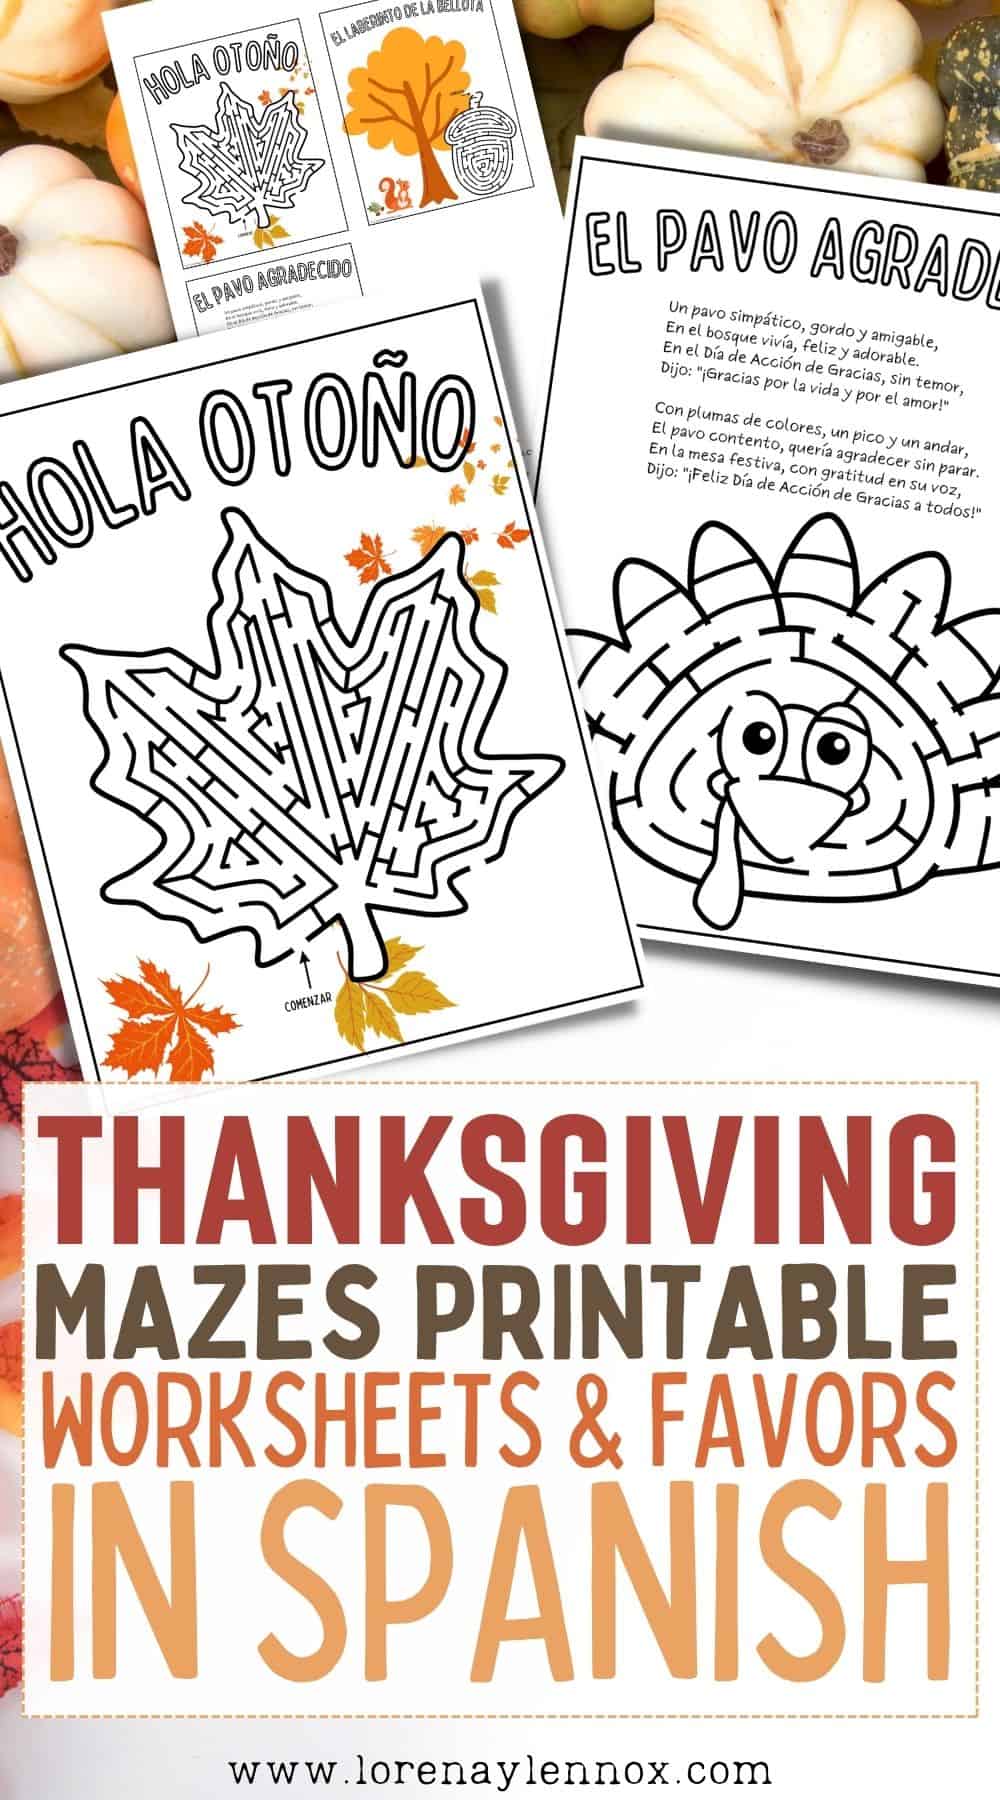 Get into the Thanksgiving spirit with this delightful Thanksgiving maze printable in Spanish! A fun and educational activity to keep the kids entertained during the holiday season. Download it now and enjoy some holiday-themed fun in Español!